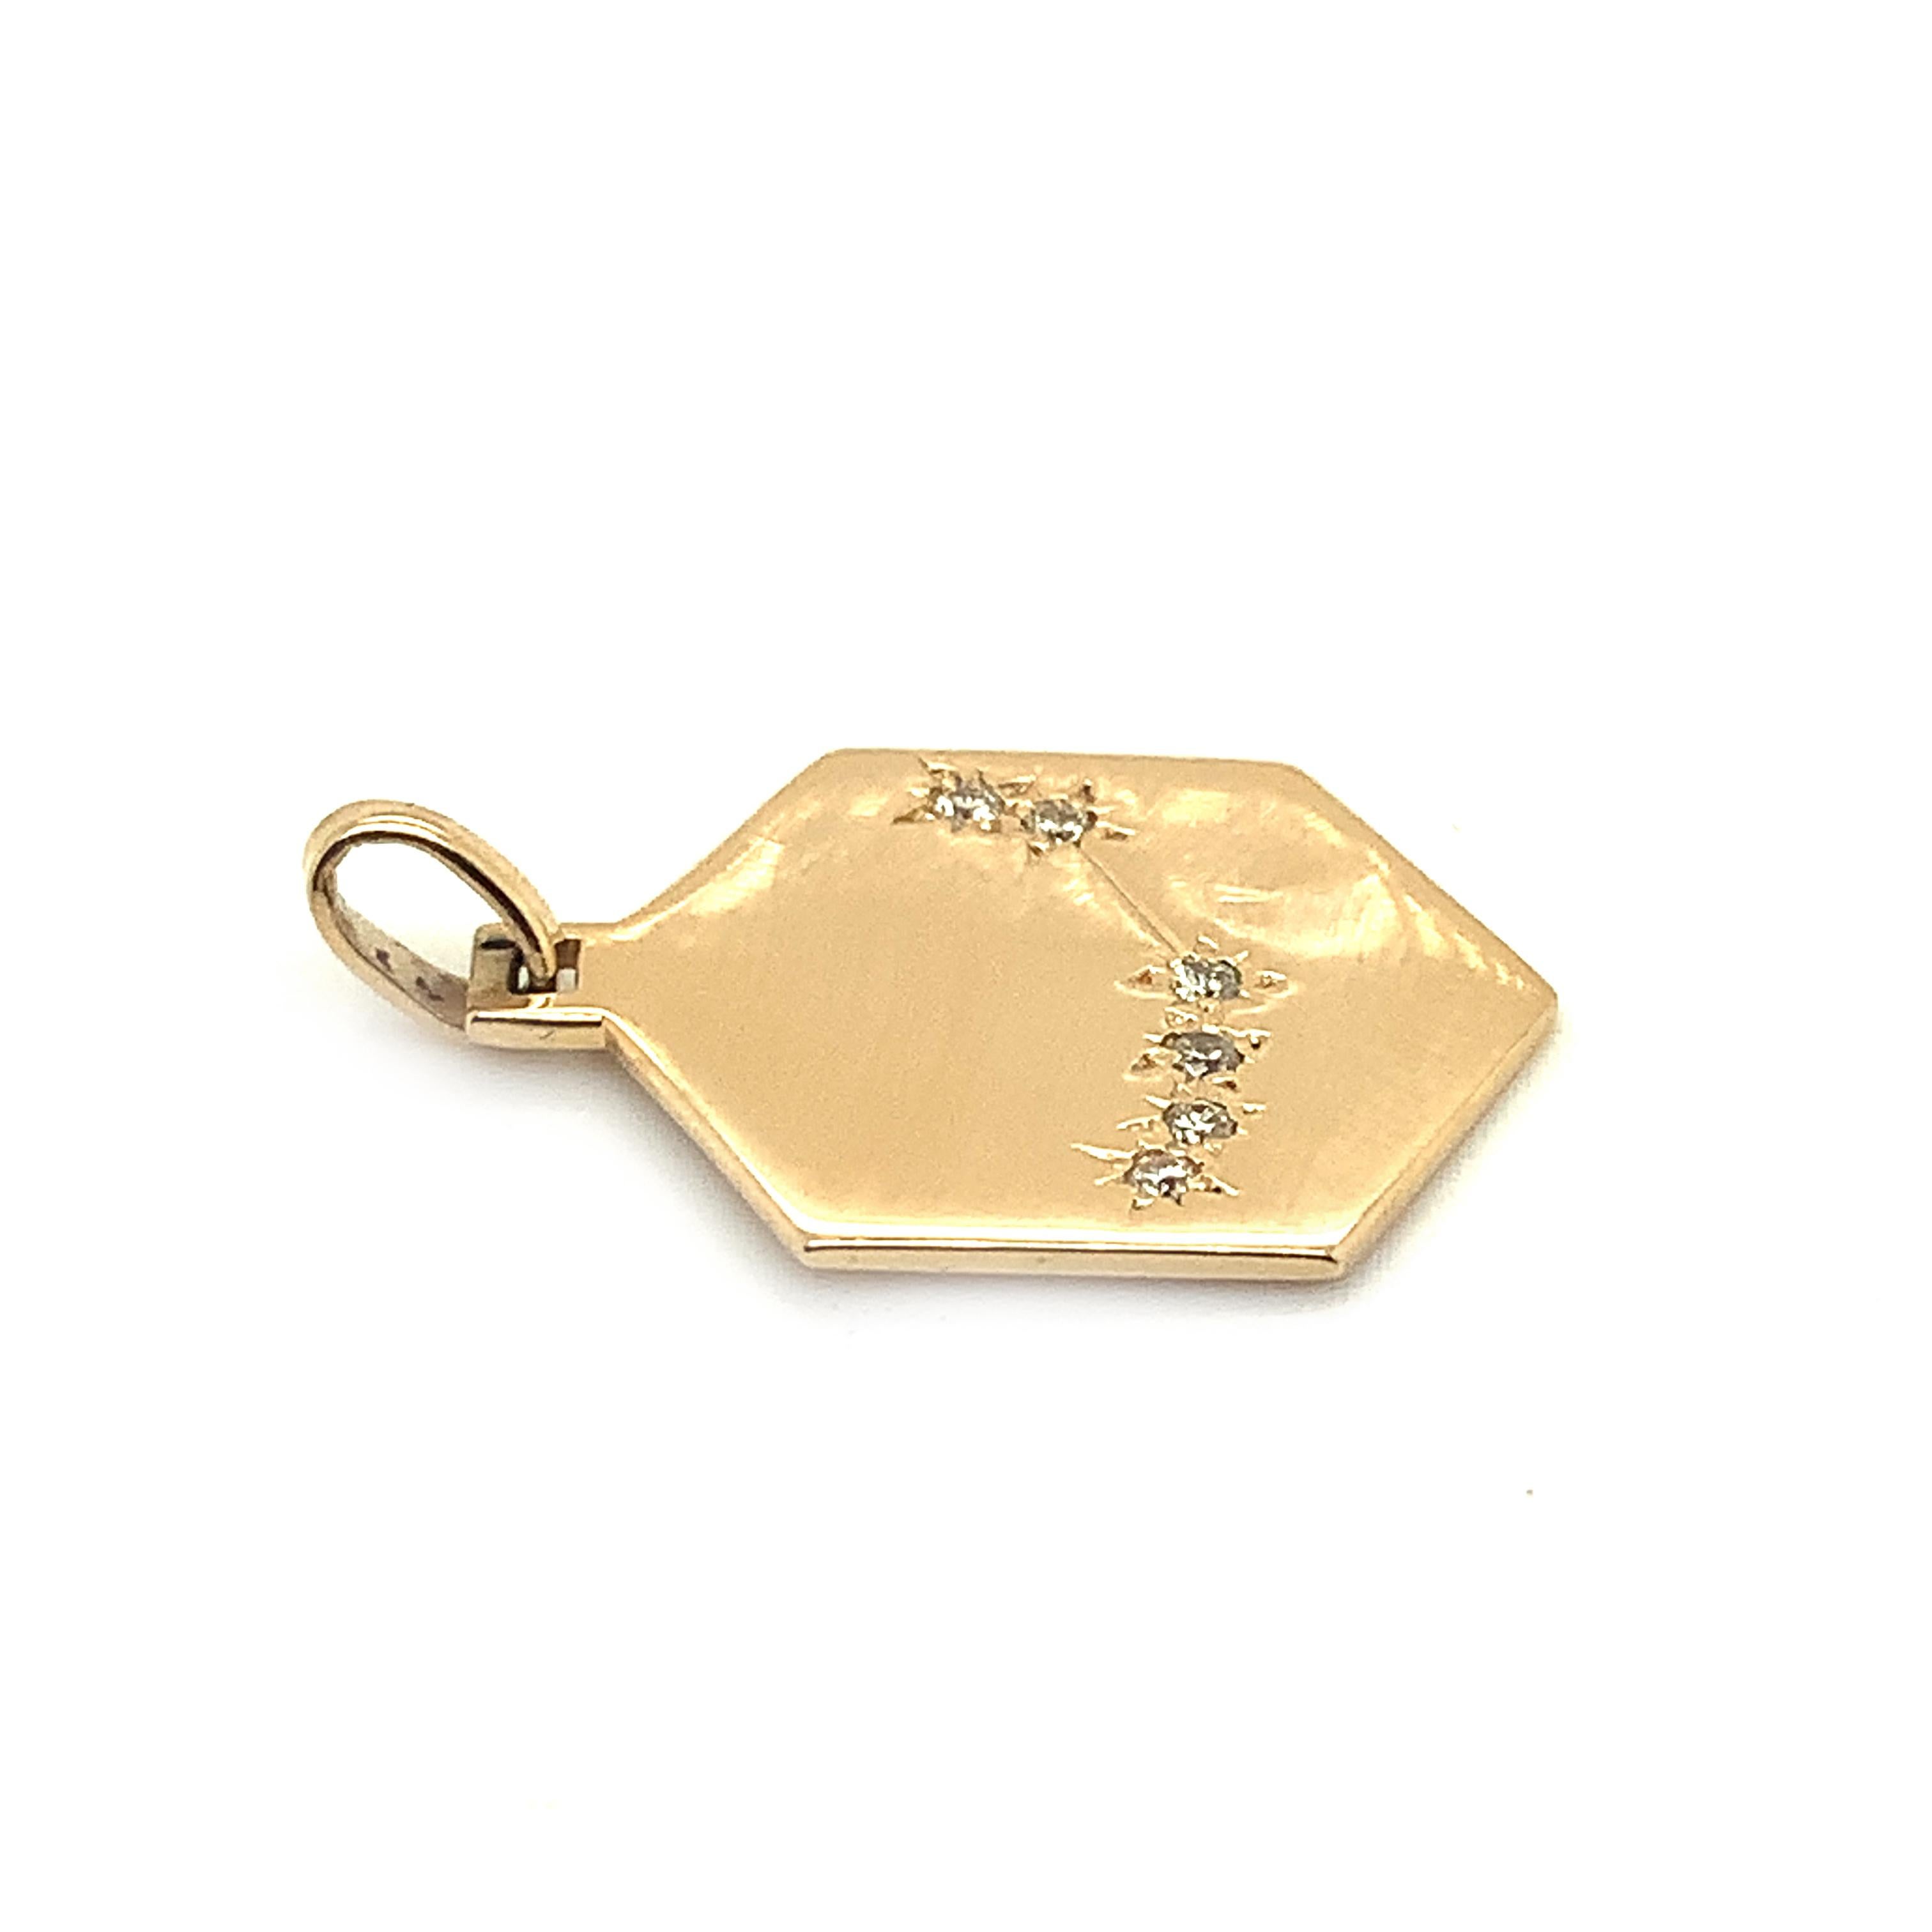 Striking six-sided 14K yellow gold Charm/Pendant.  Six faceted diamonds in a starburst pattern portray the zodiac 